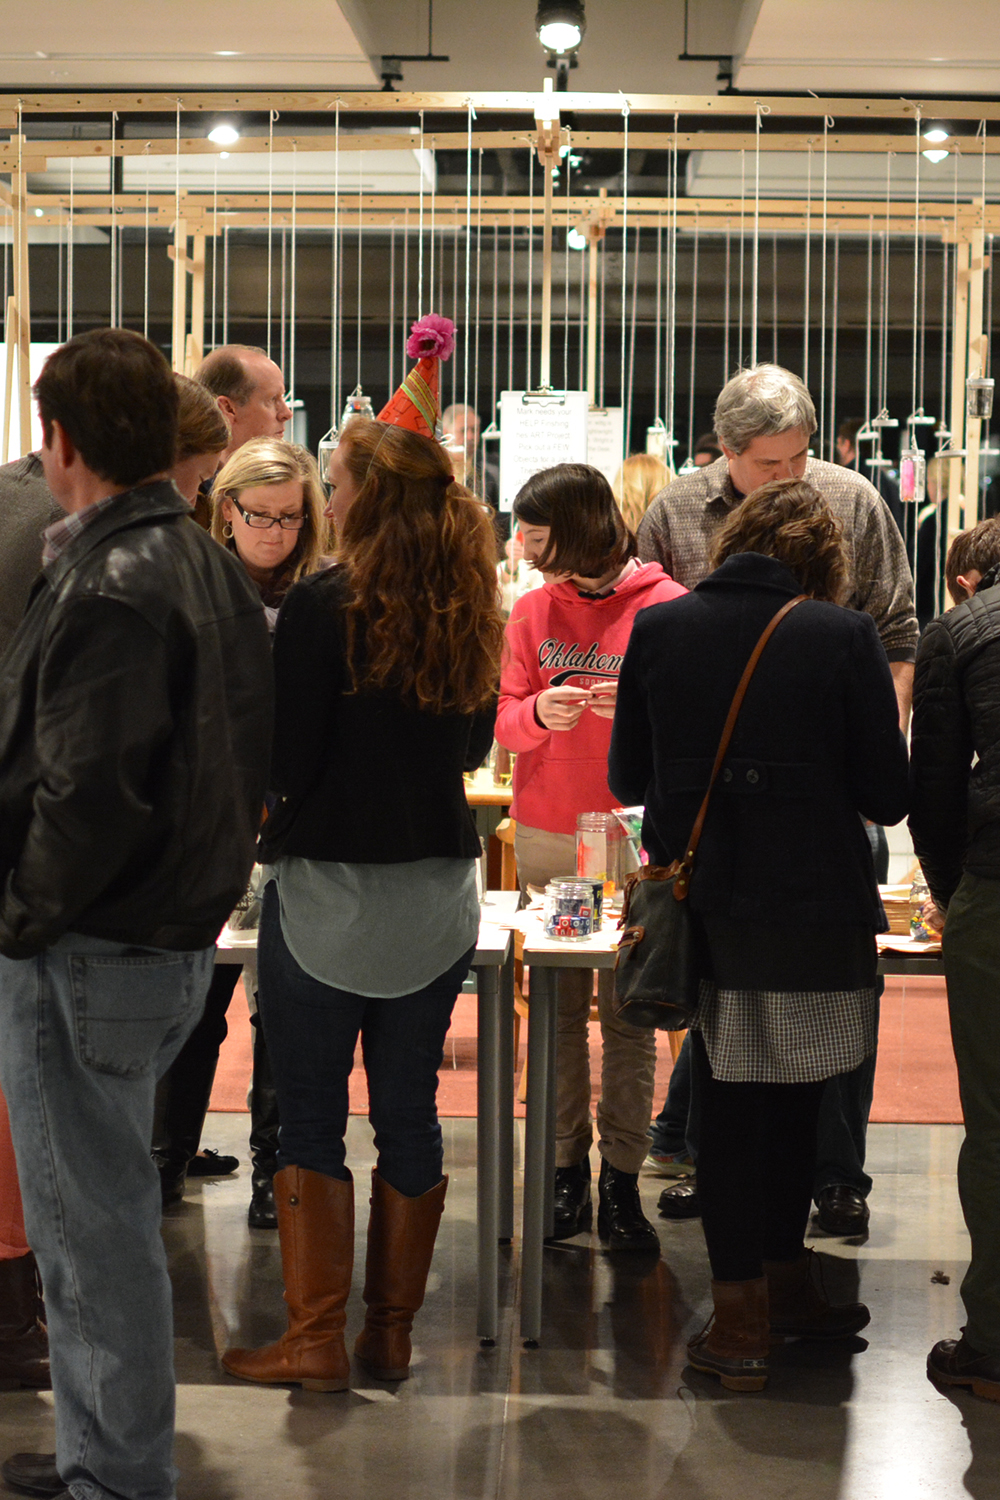 Visitors filling the jars with objects during the opening reception.